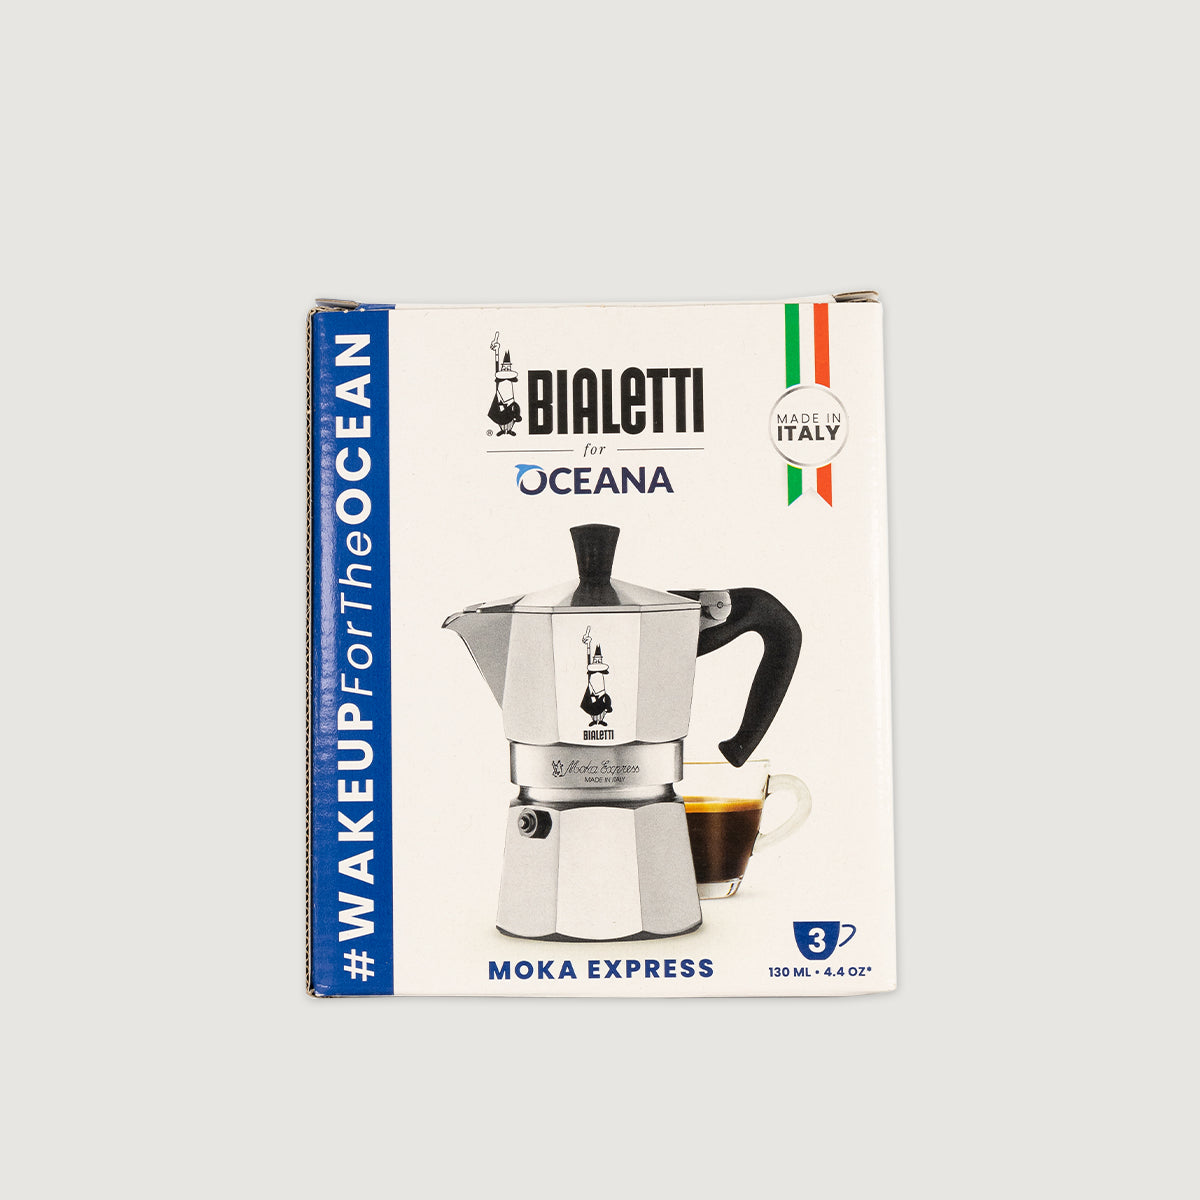 Moka Express 1 cup bialetti, Selection of products